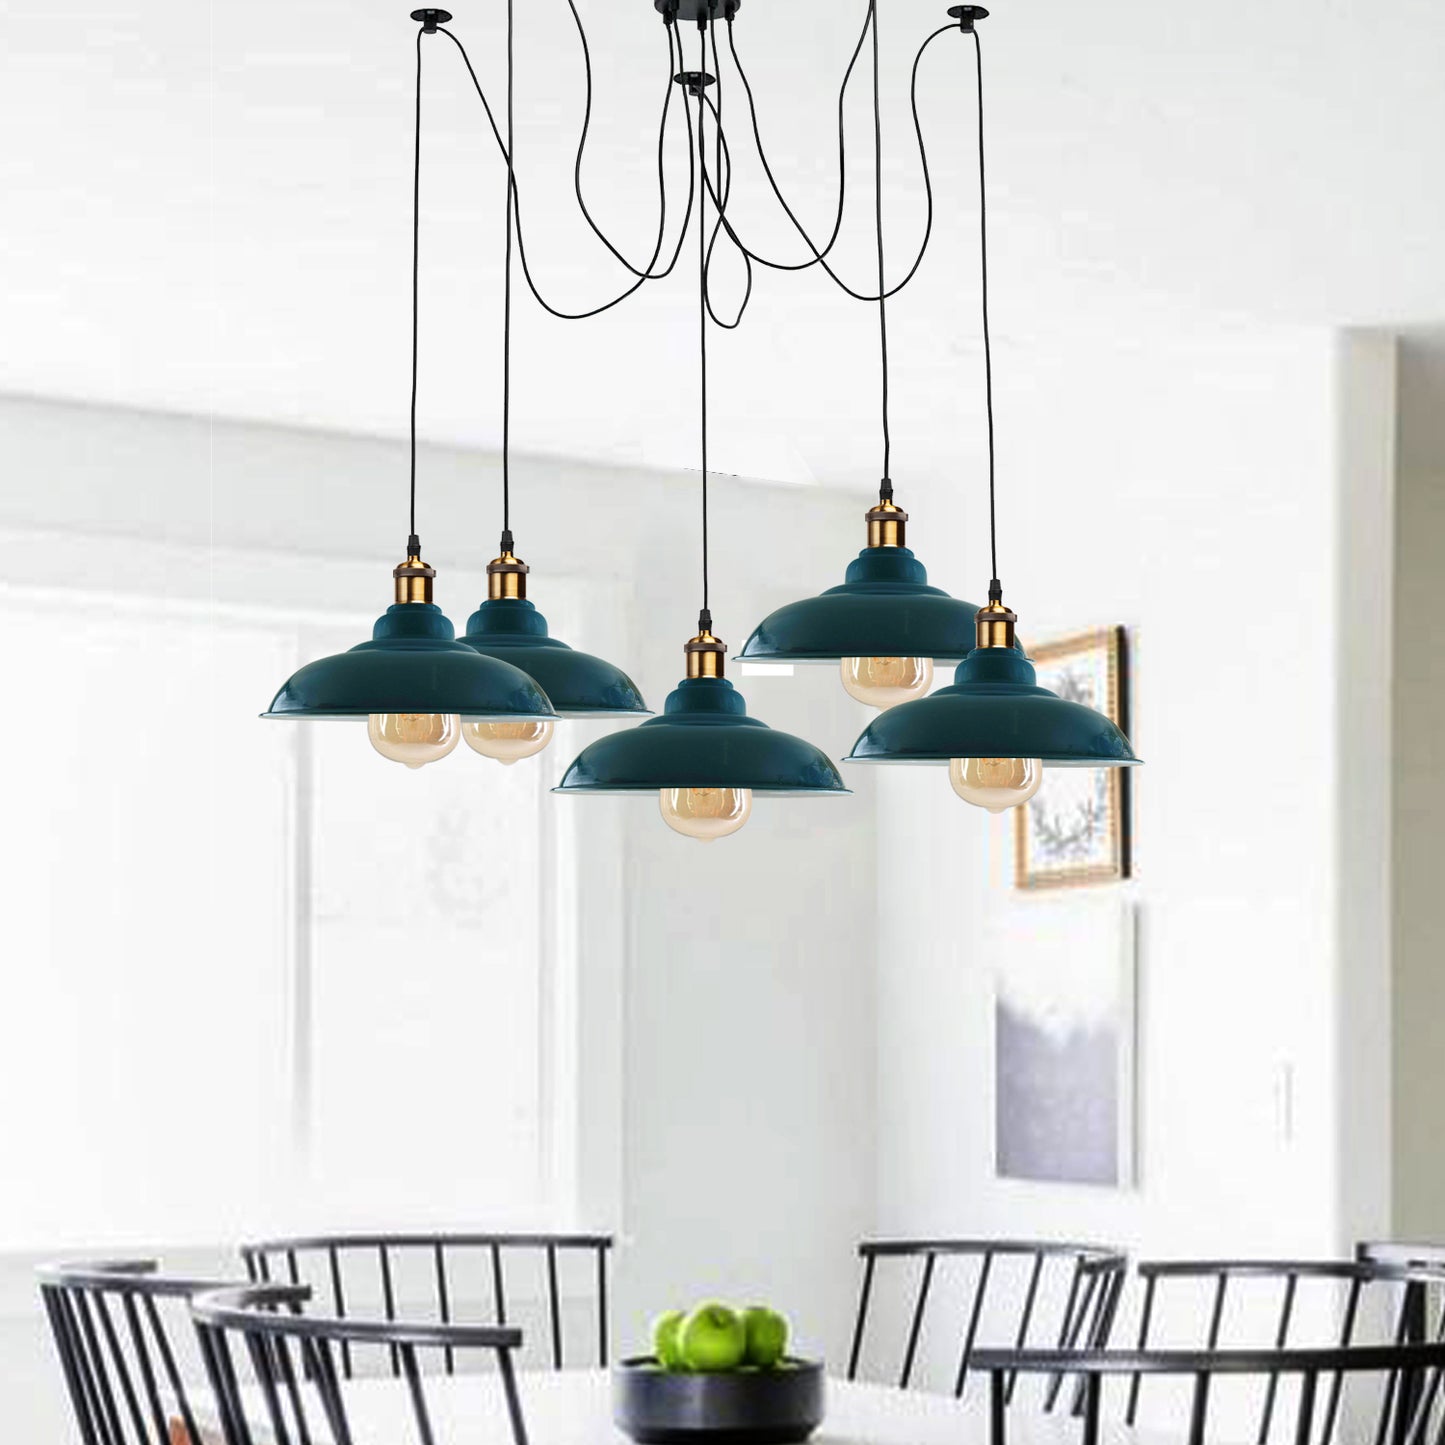 Illuminate Your Home with the Latest 5way Vintage Ceiling Pendant Spider Light ~2219